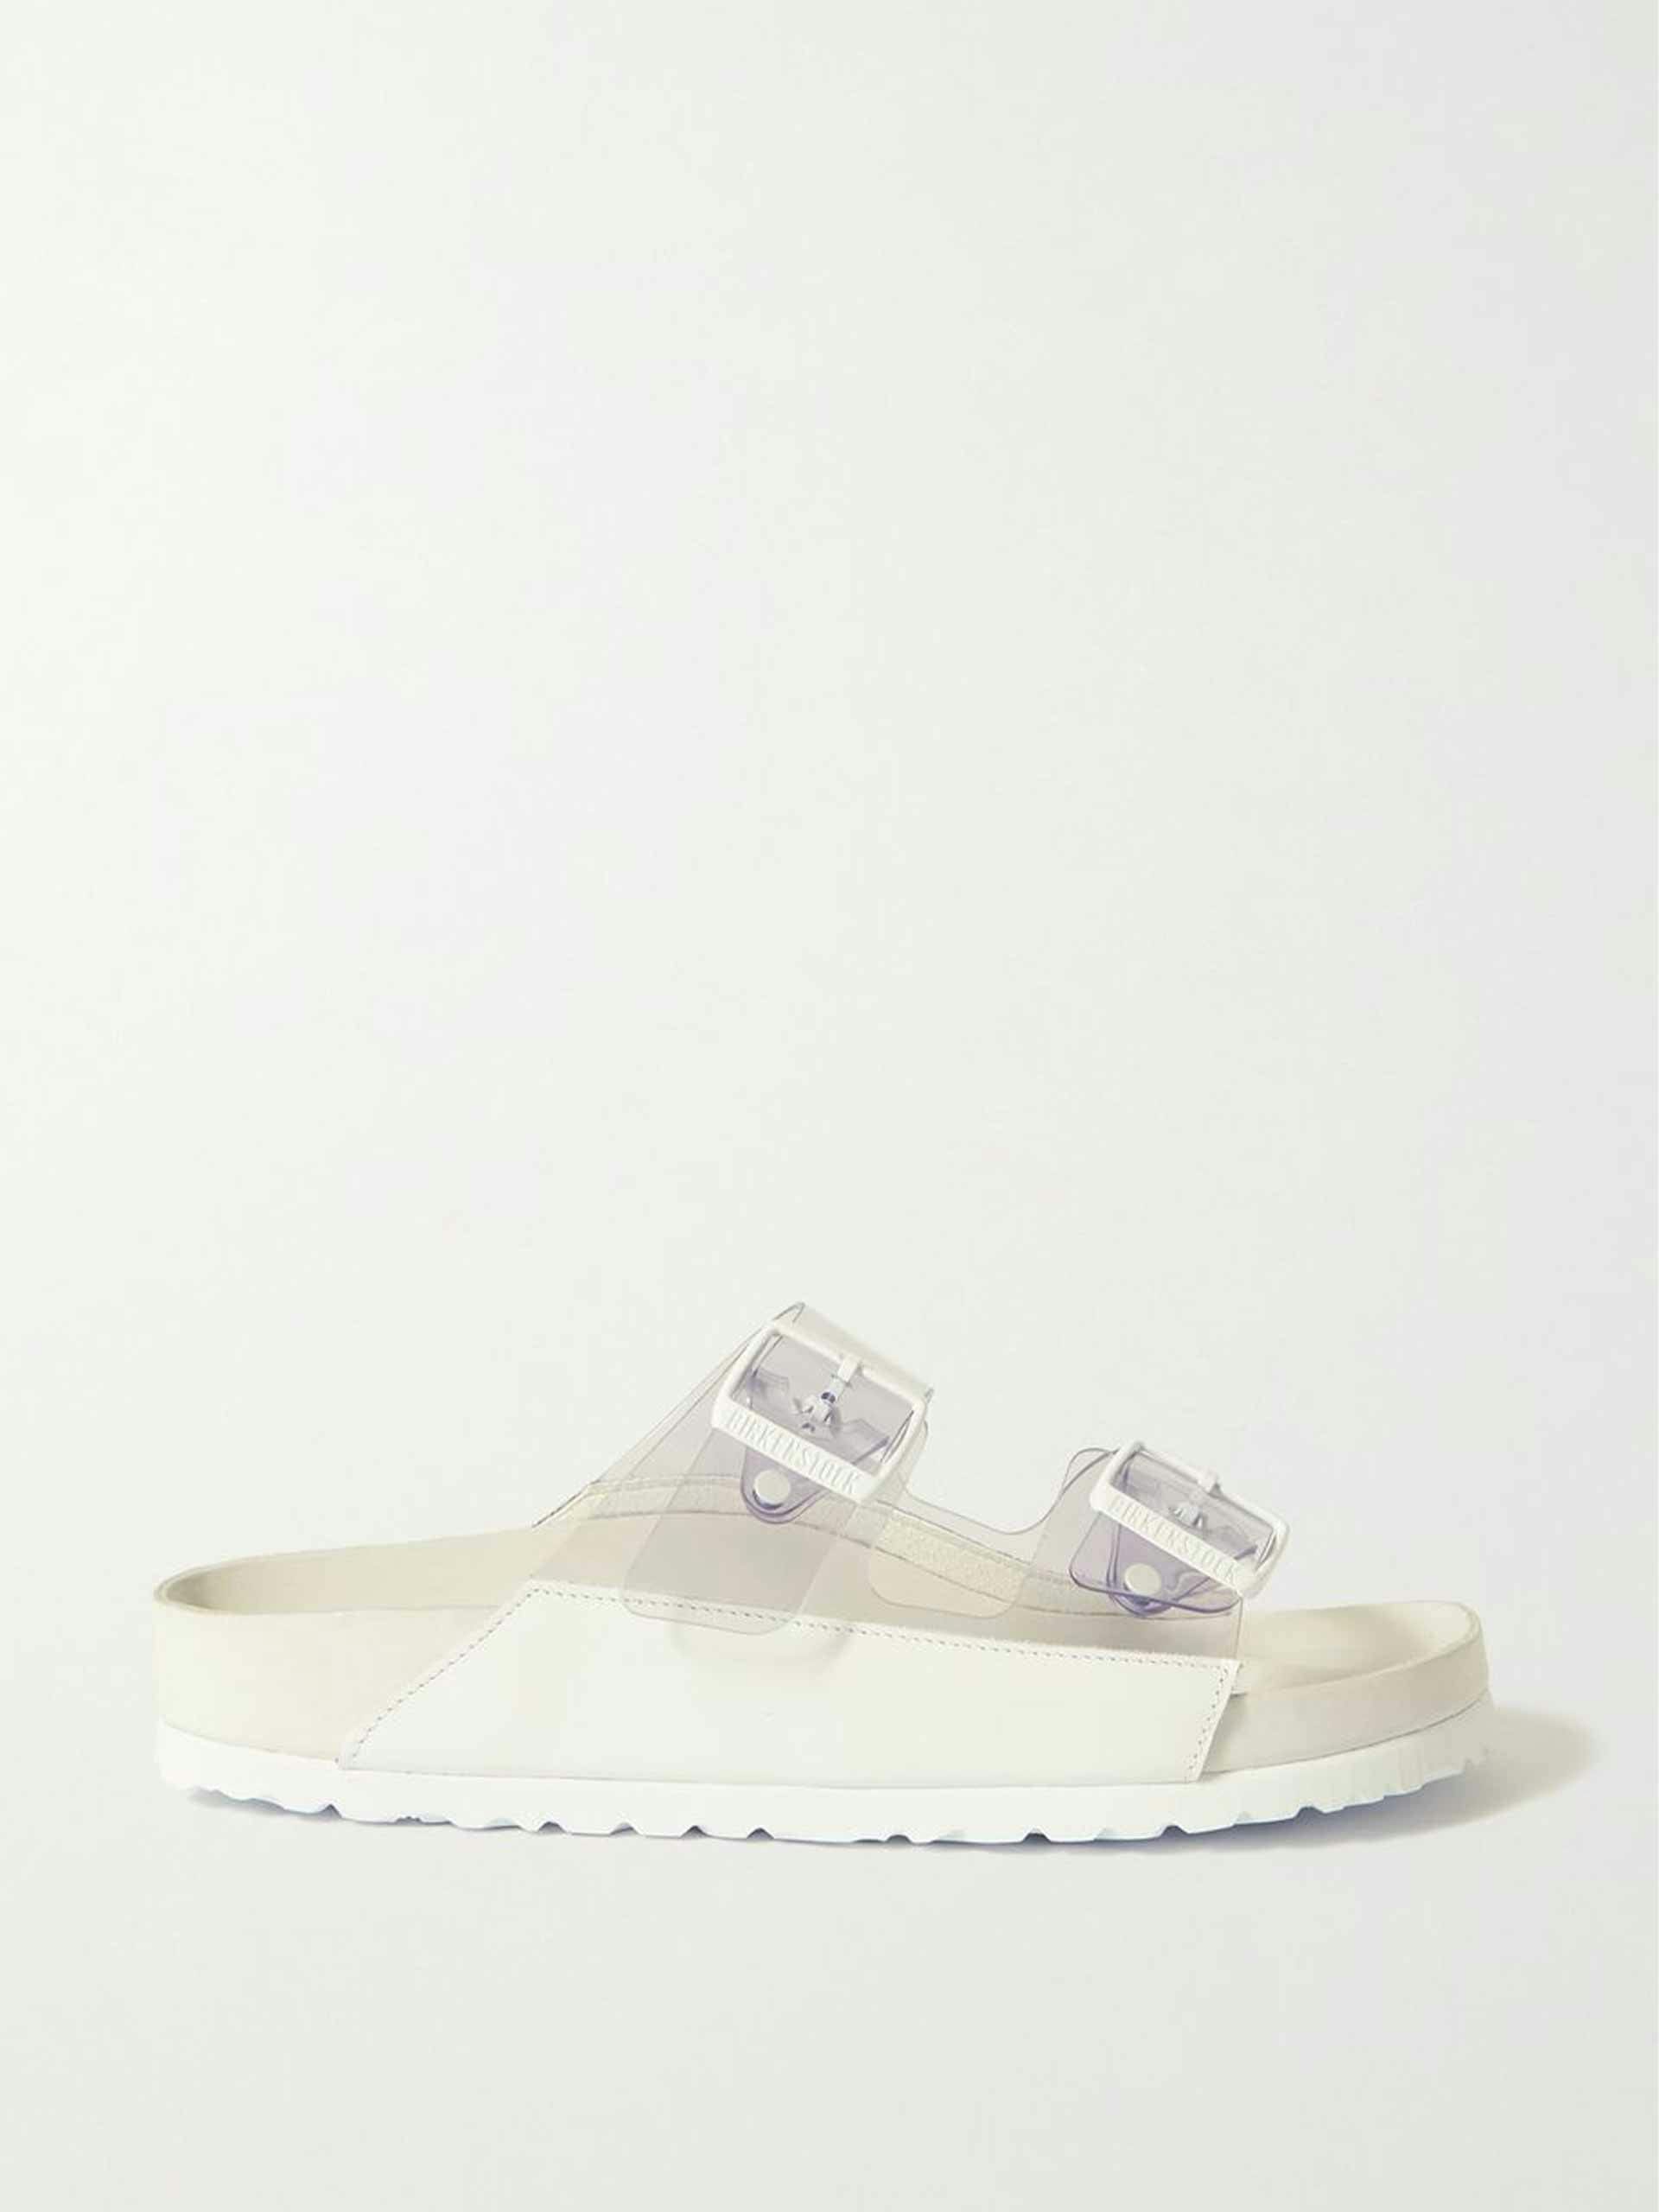 White and clear sandals